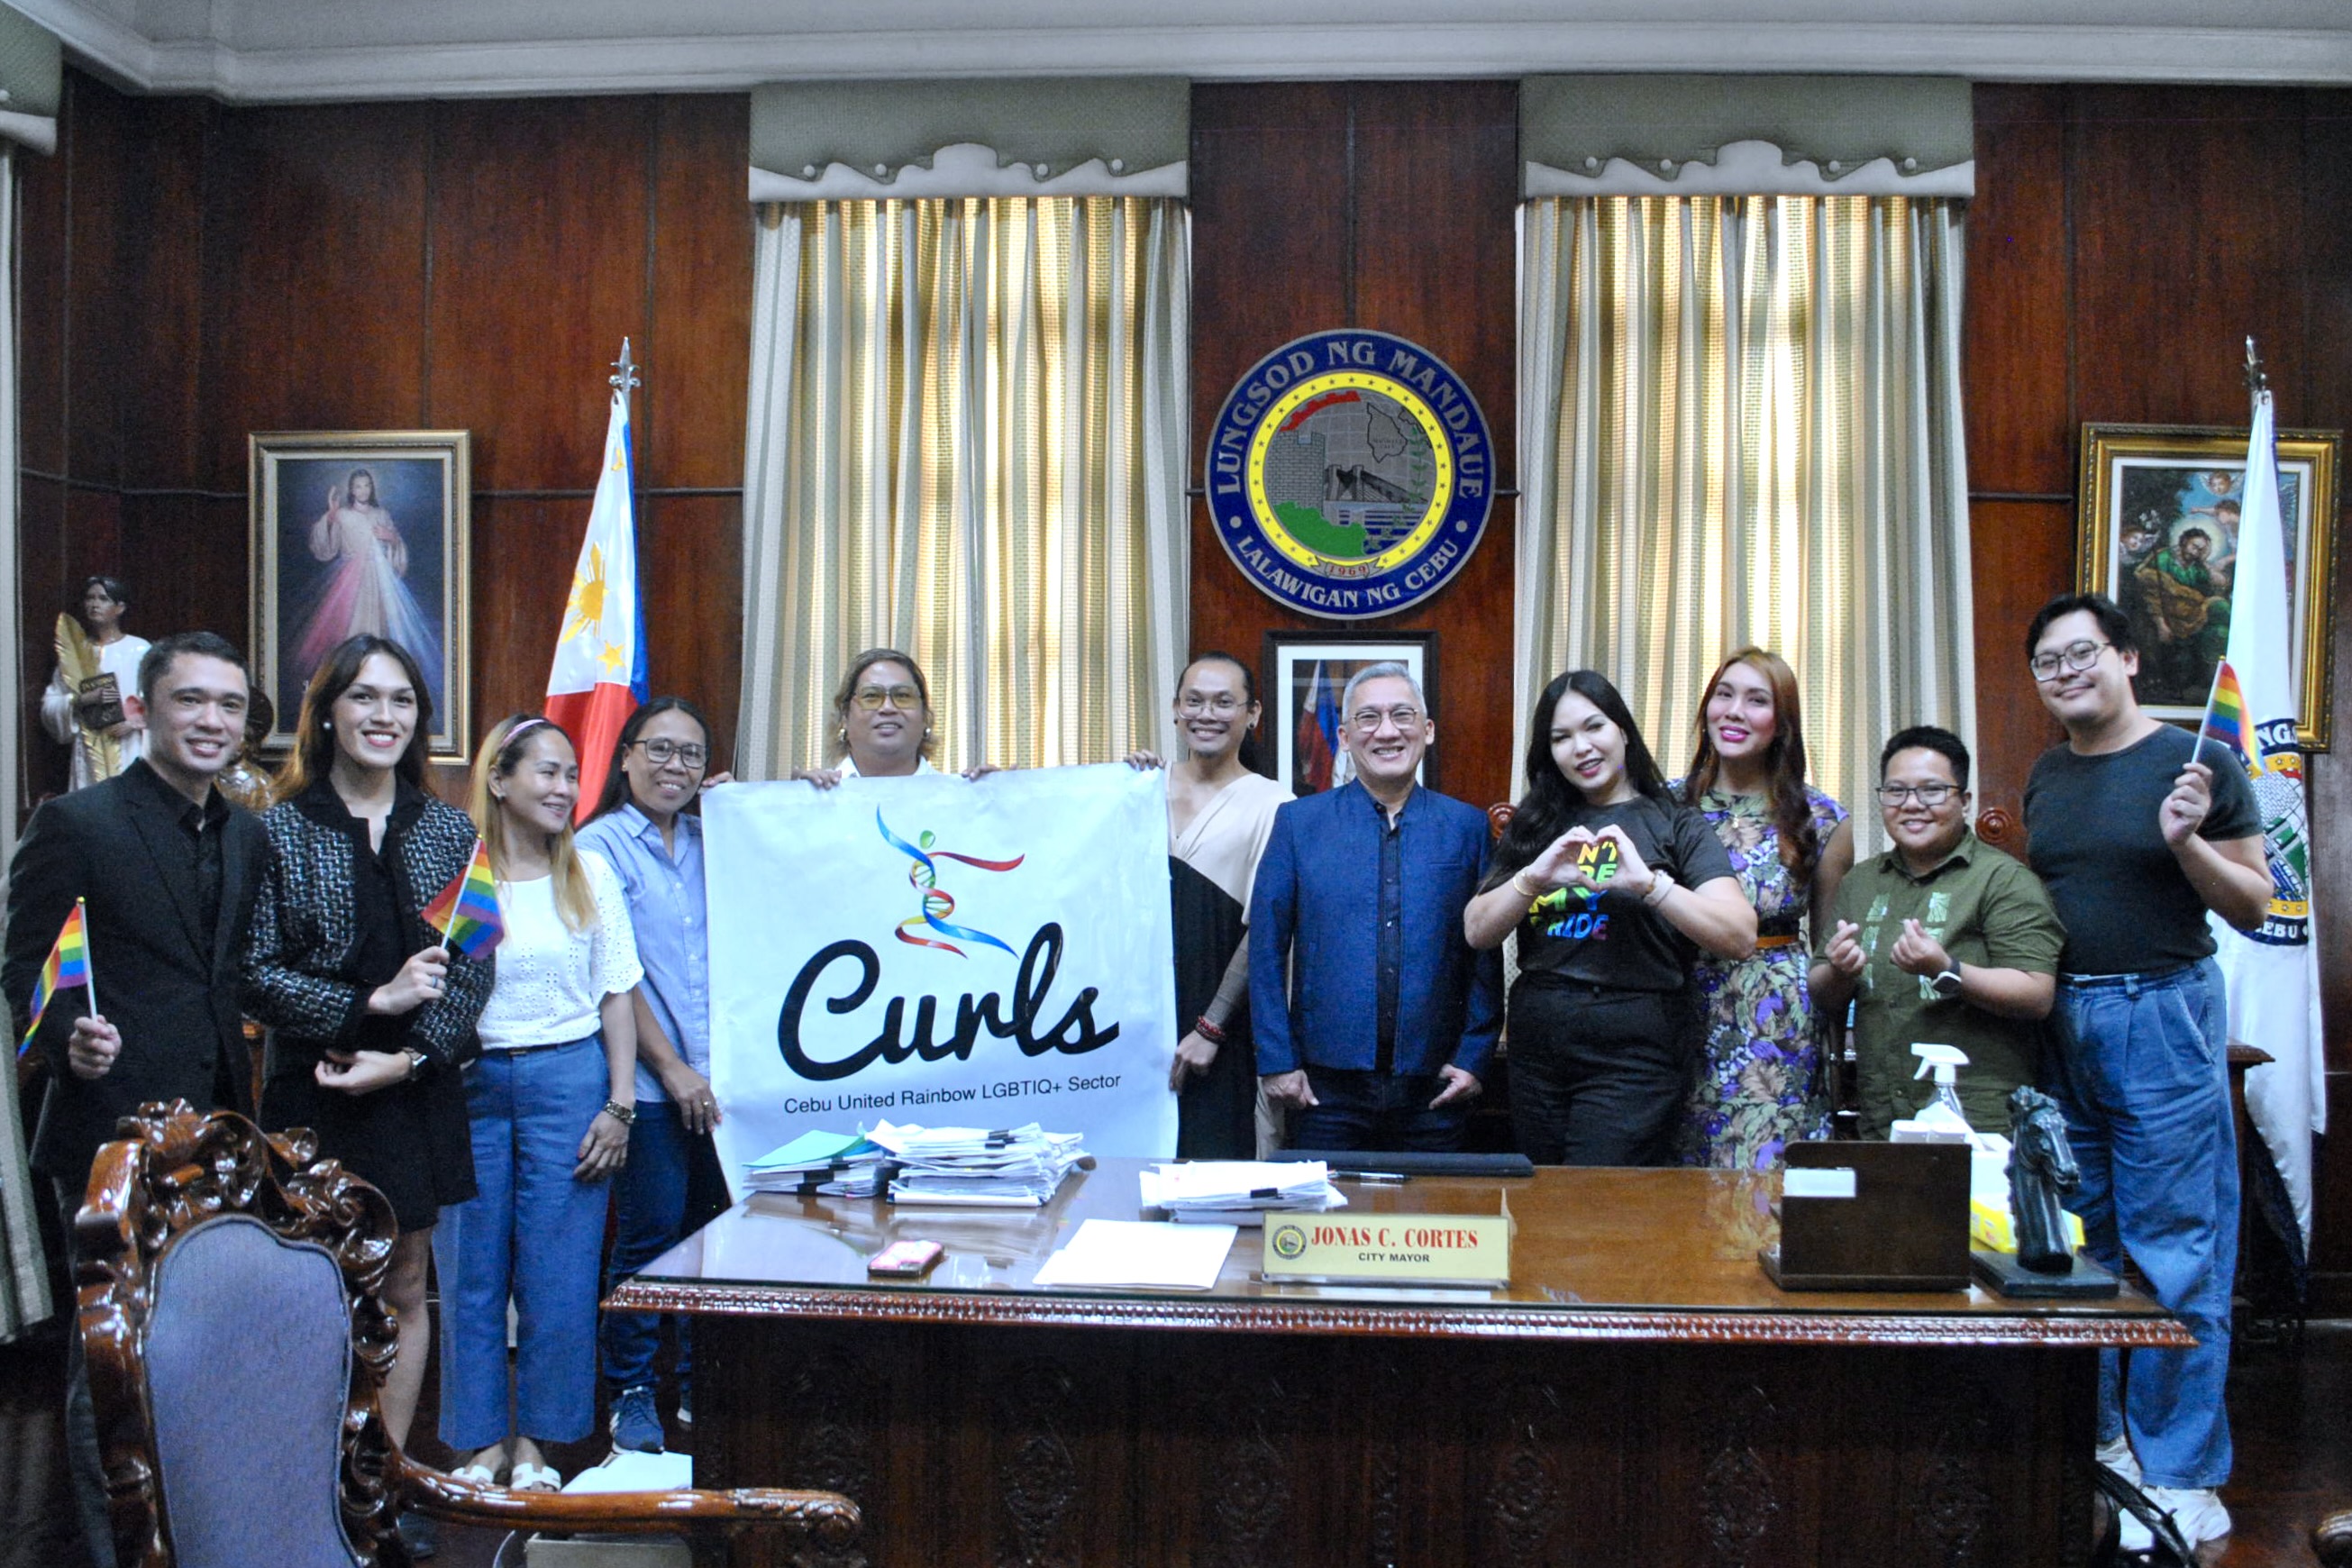 People stand behind an office desk with a CURLS sign.